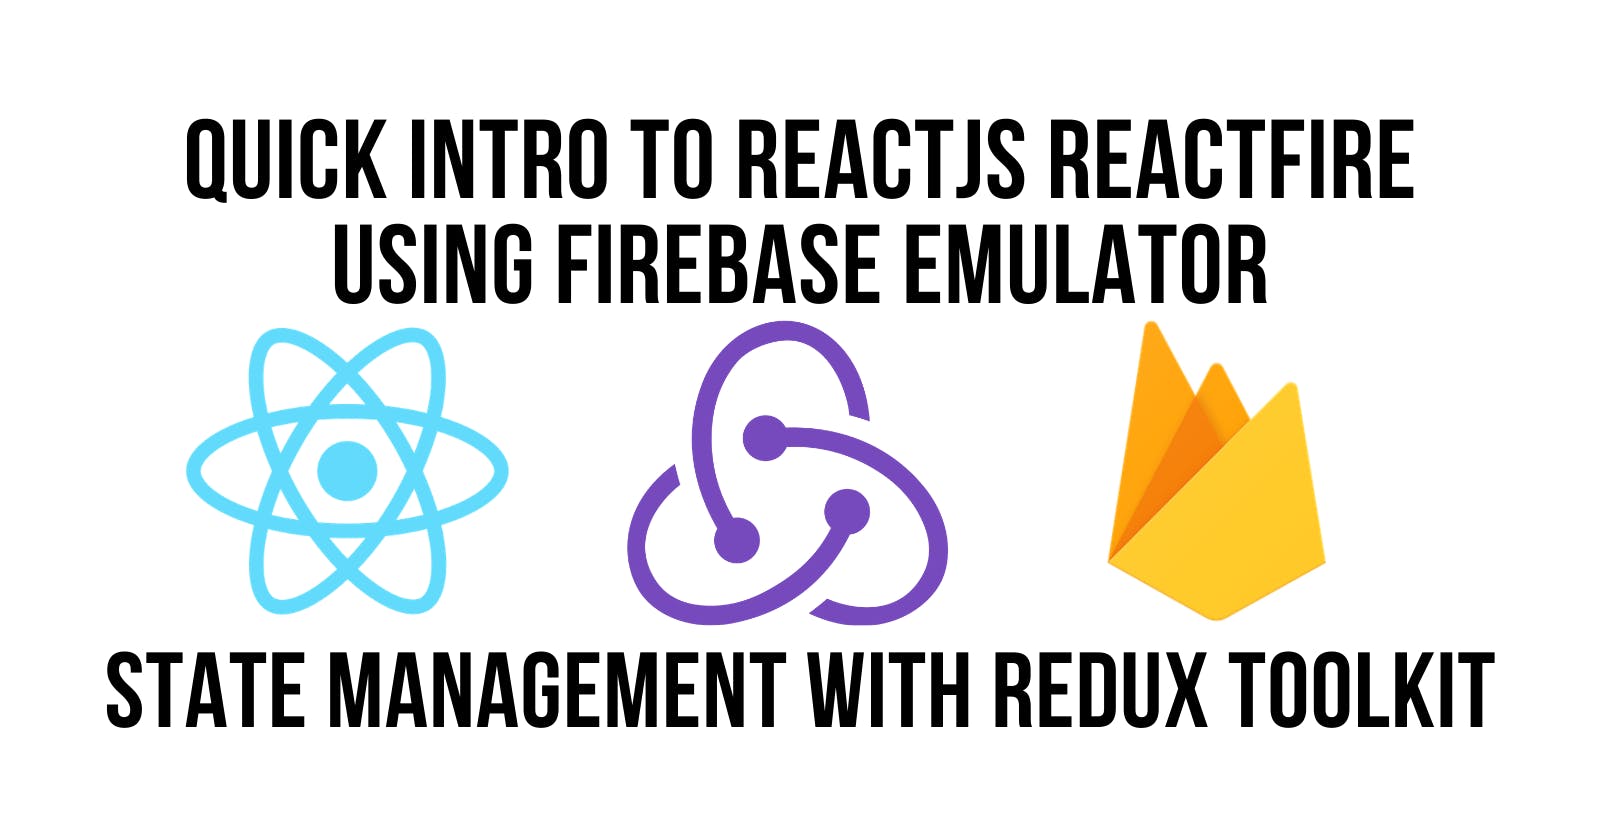 How To Use ReactFire & Redux Using Firebase Emulator to Build a CRUD Application